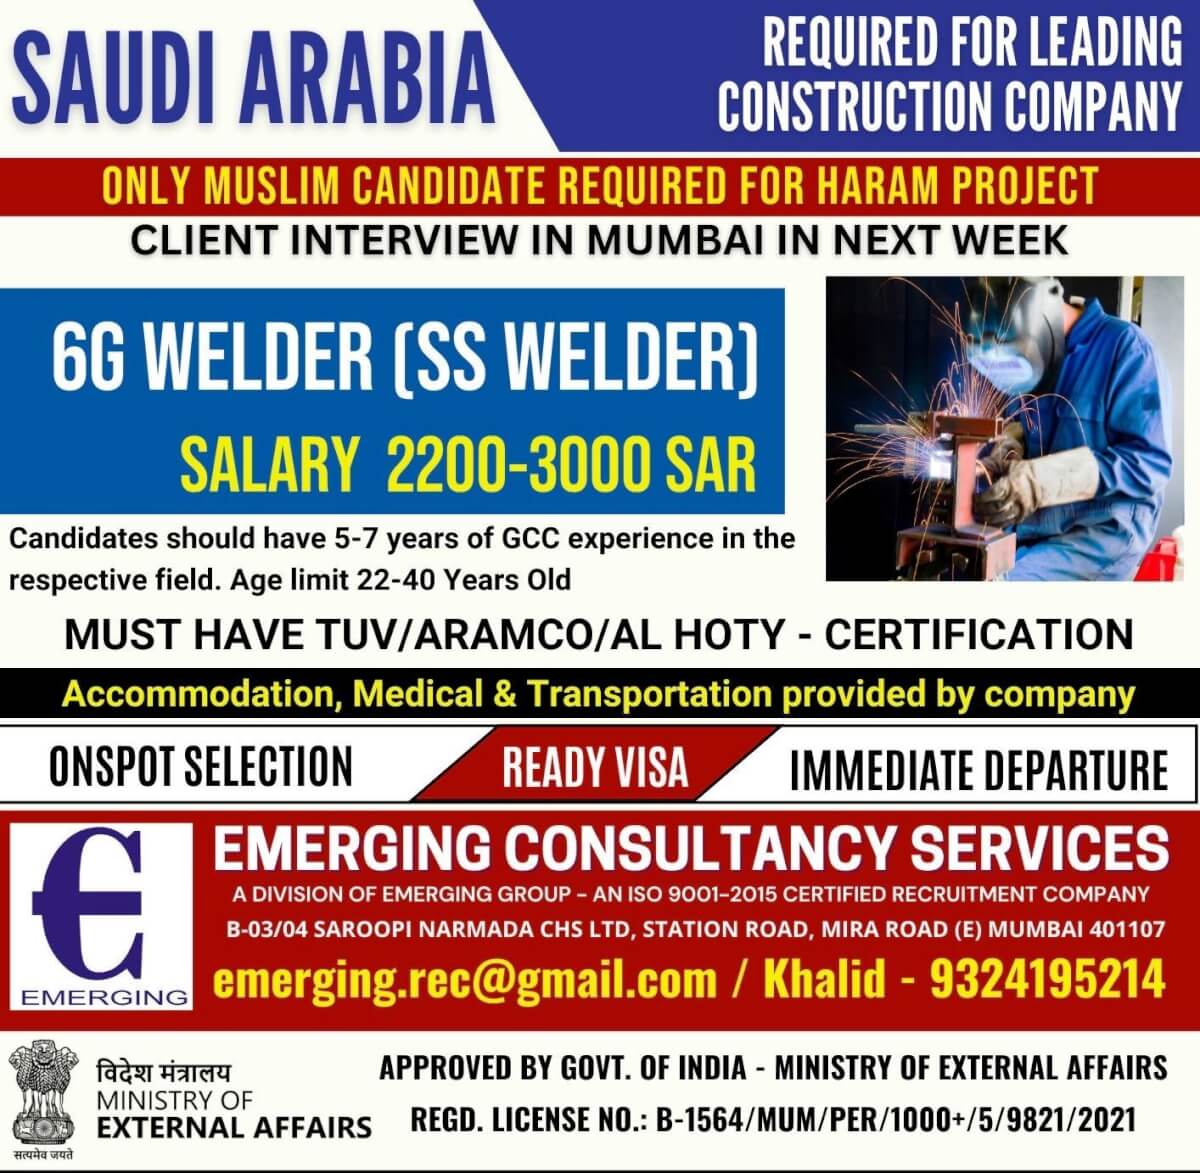 REQUIRED FOR LEADING CONSTRUCTION COMPANY IN KSA